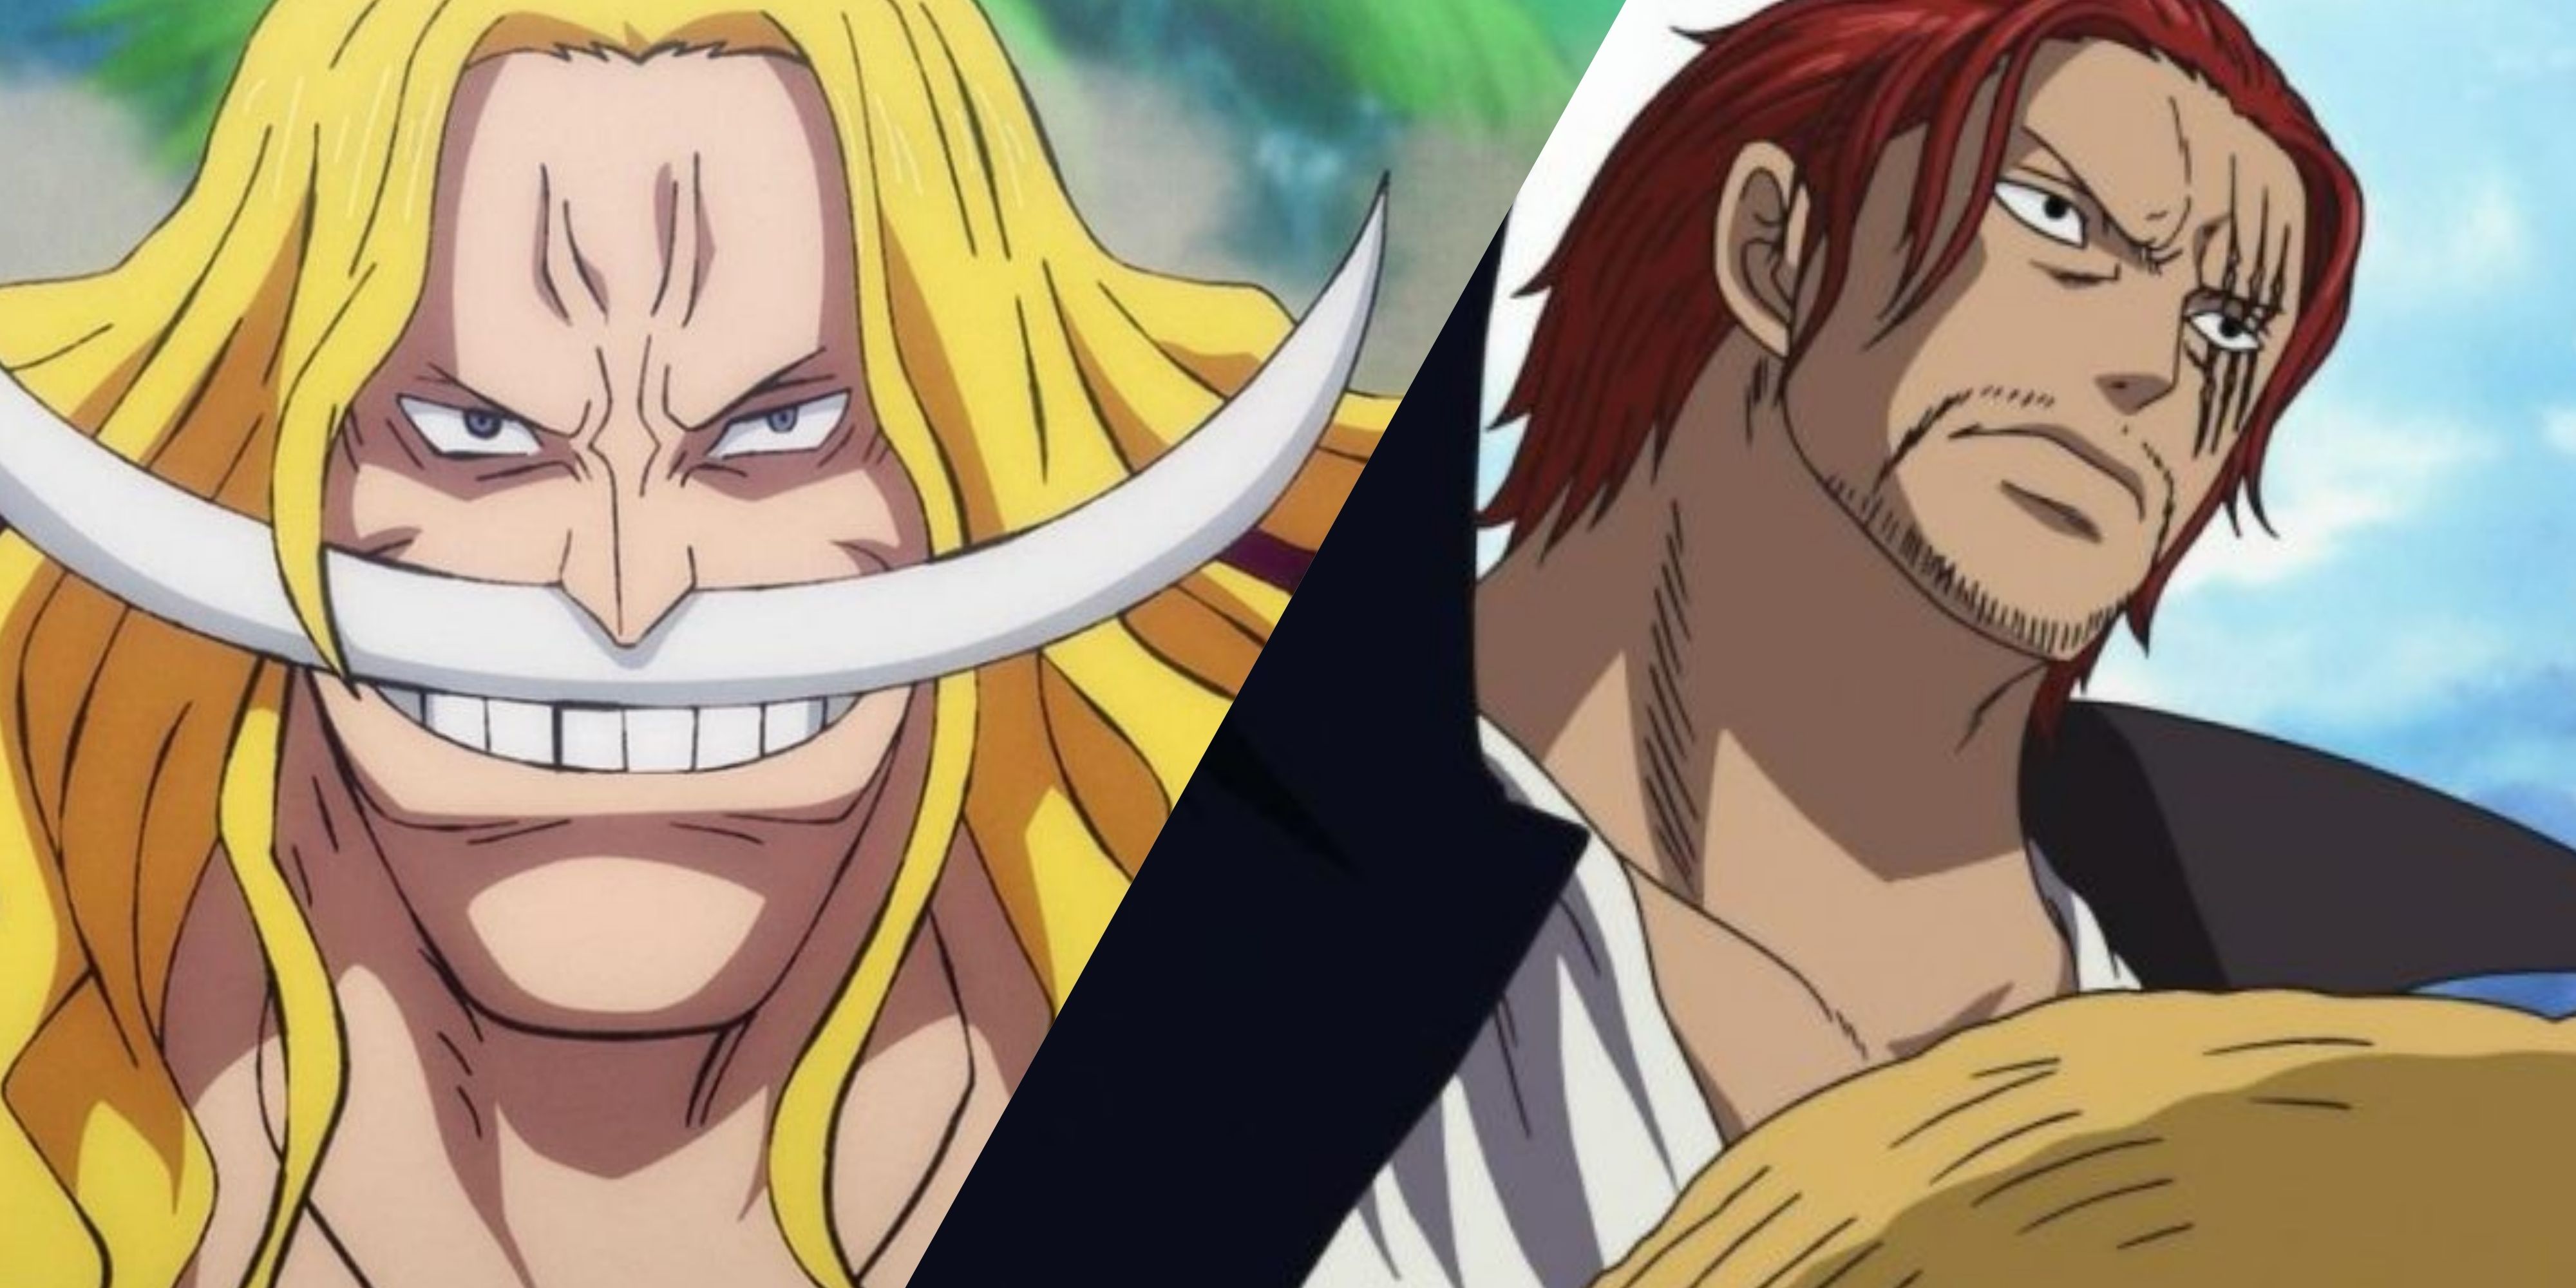 Shanks Vs. Whitebeard: Who Is The Stronger One Piece Yonko?